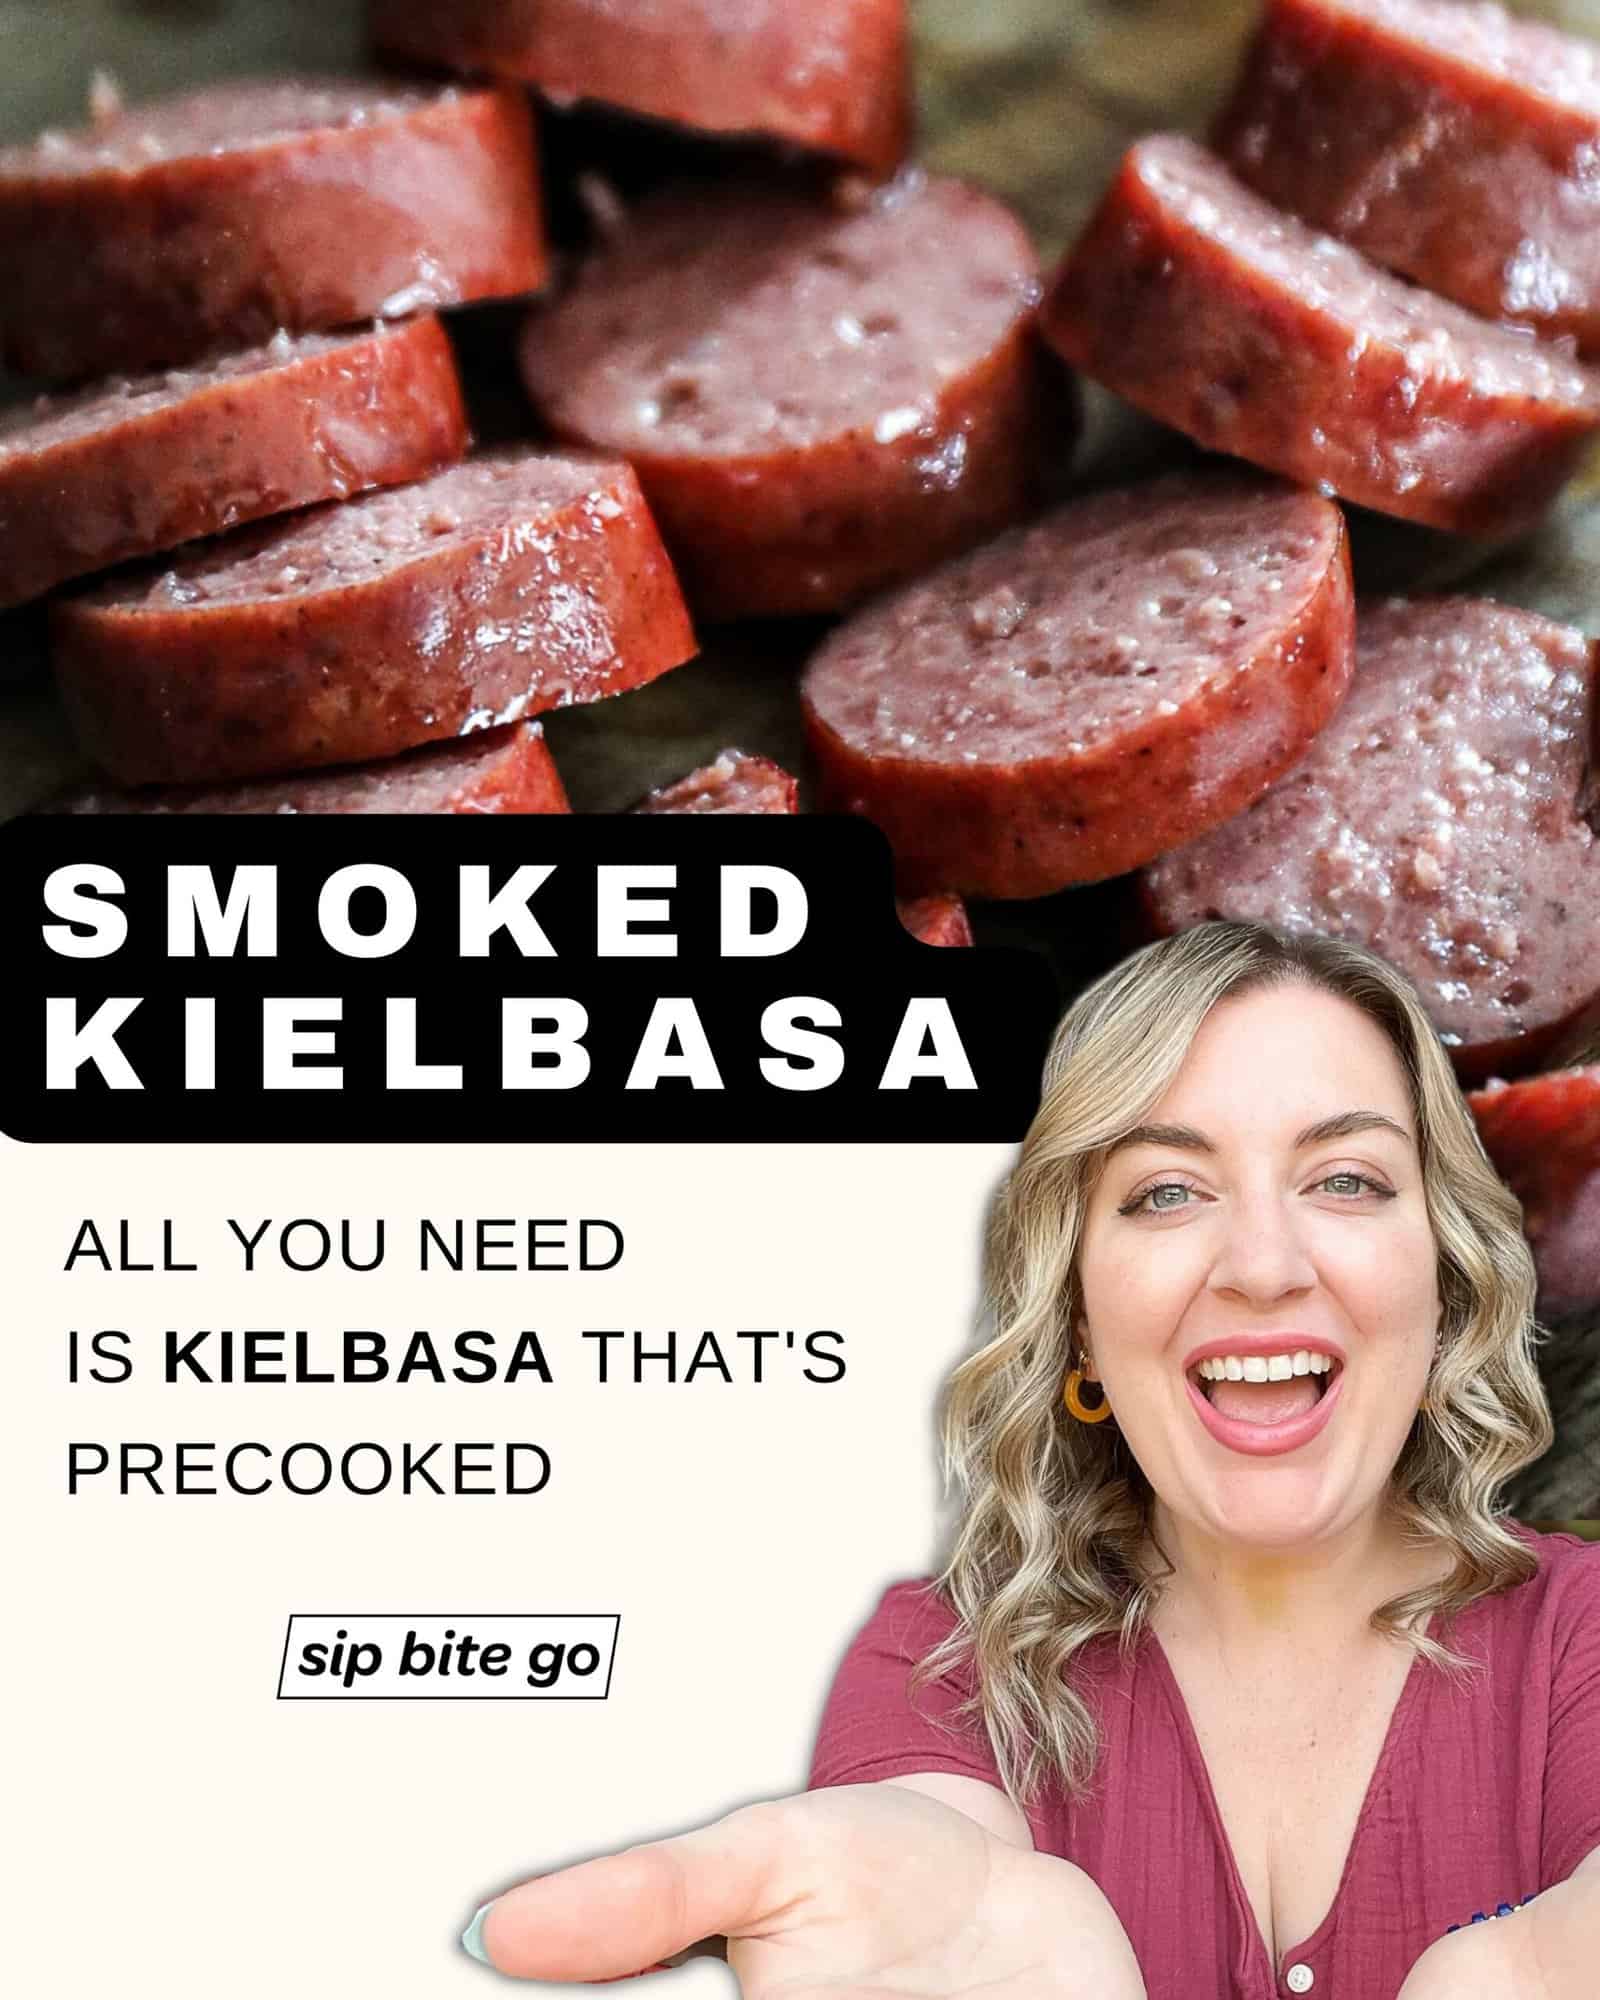 Infographic with recipe ingredients list and caption for smoking kielbasa sausage on Traeger pellet grills with Jenna Passaro food blogger of Sip Bite Go